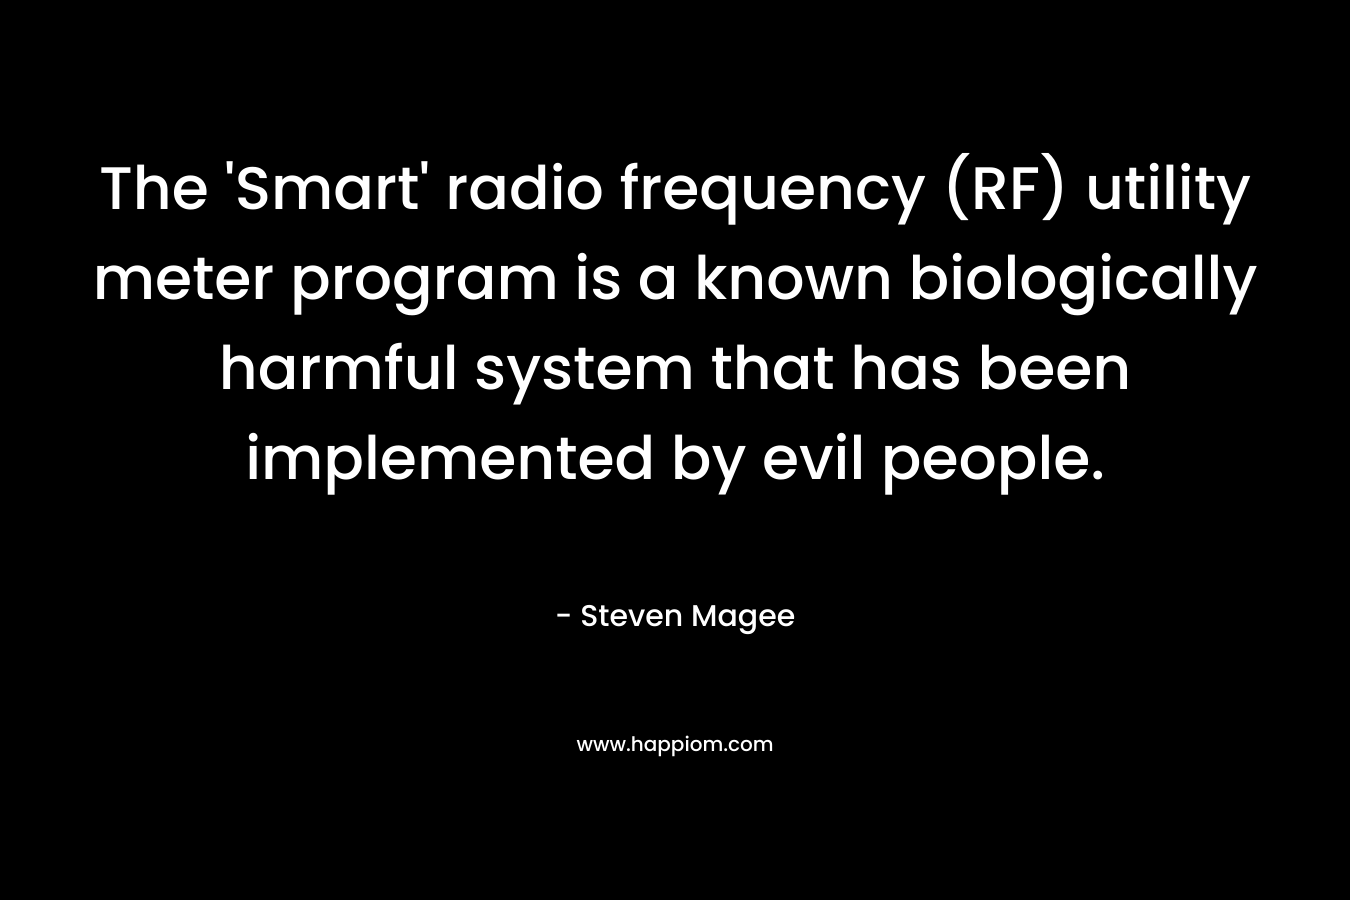 The 'Smart' radio frequency (RF) utility meter program is a known biologically harmful system that has been implemented by evil people.